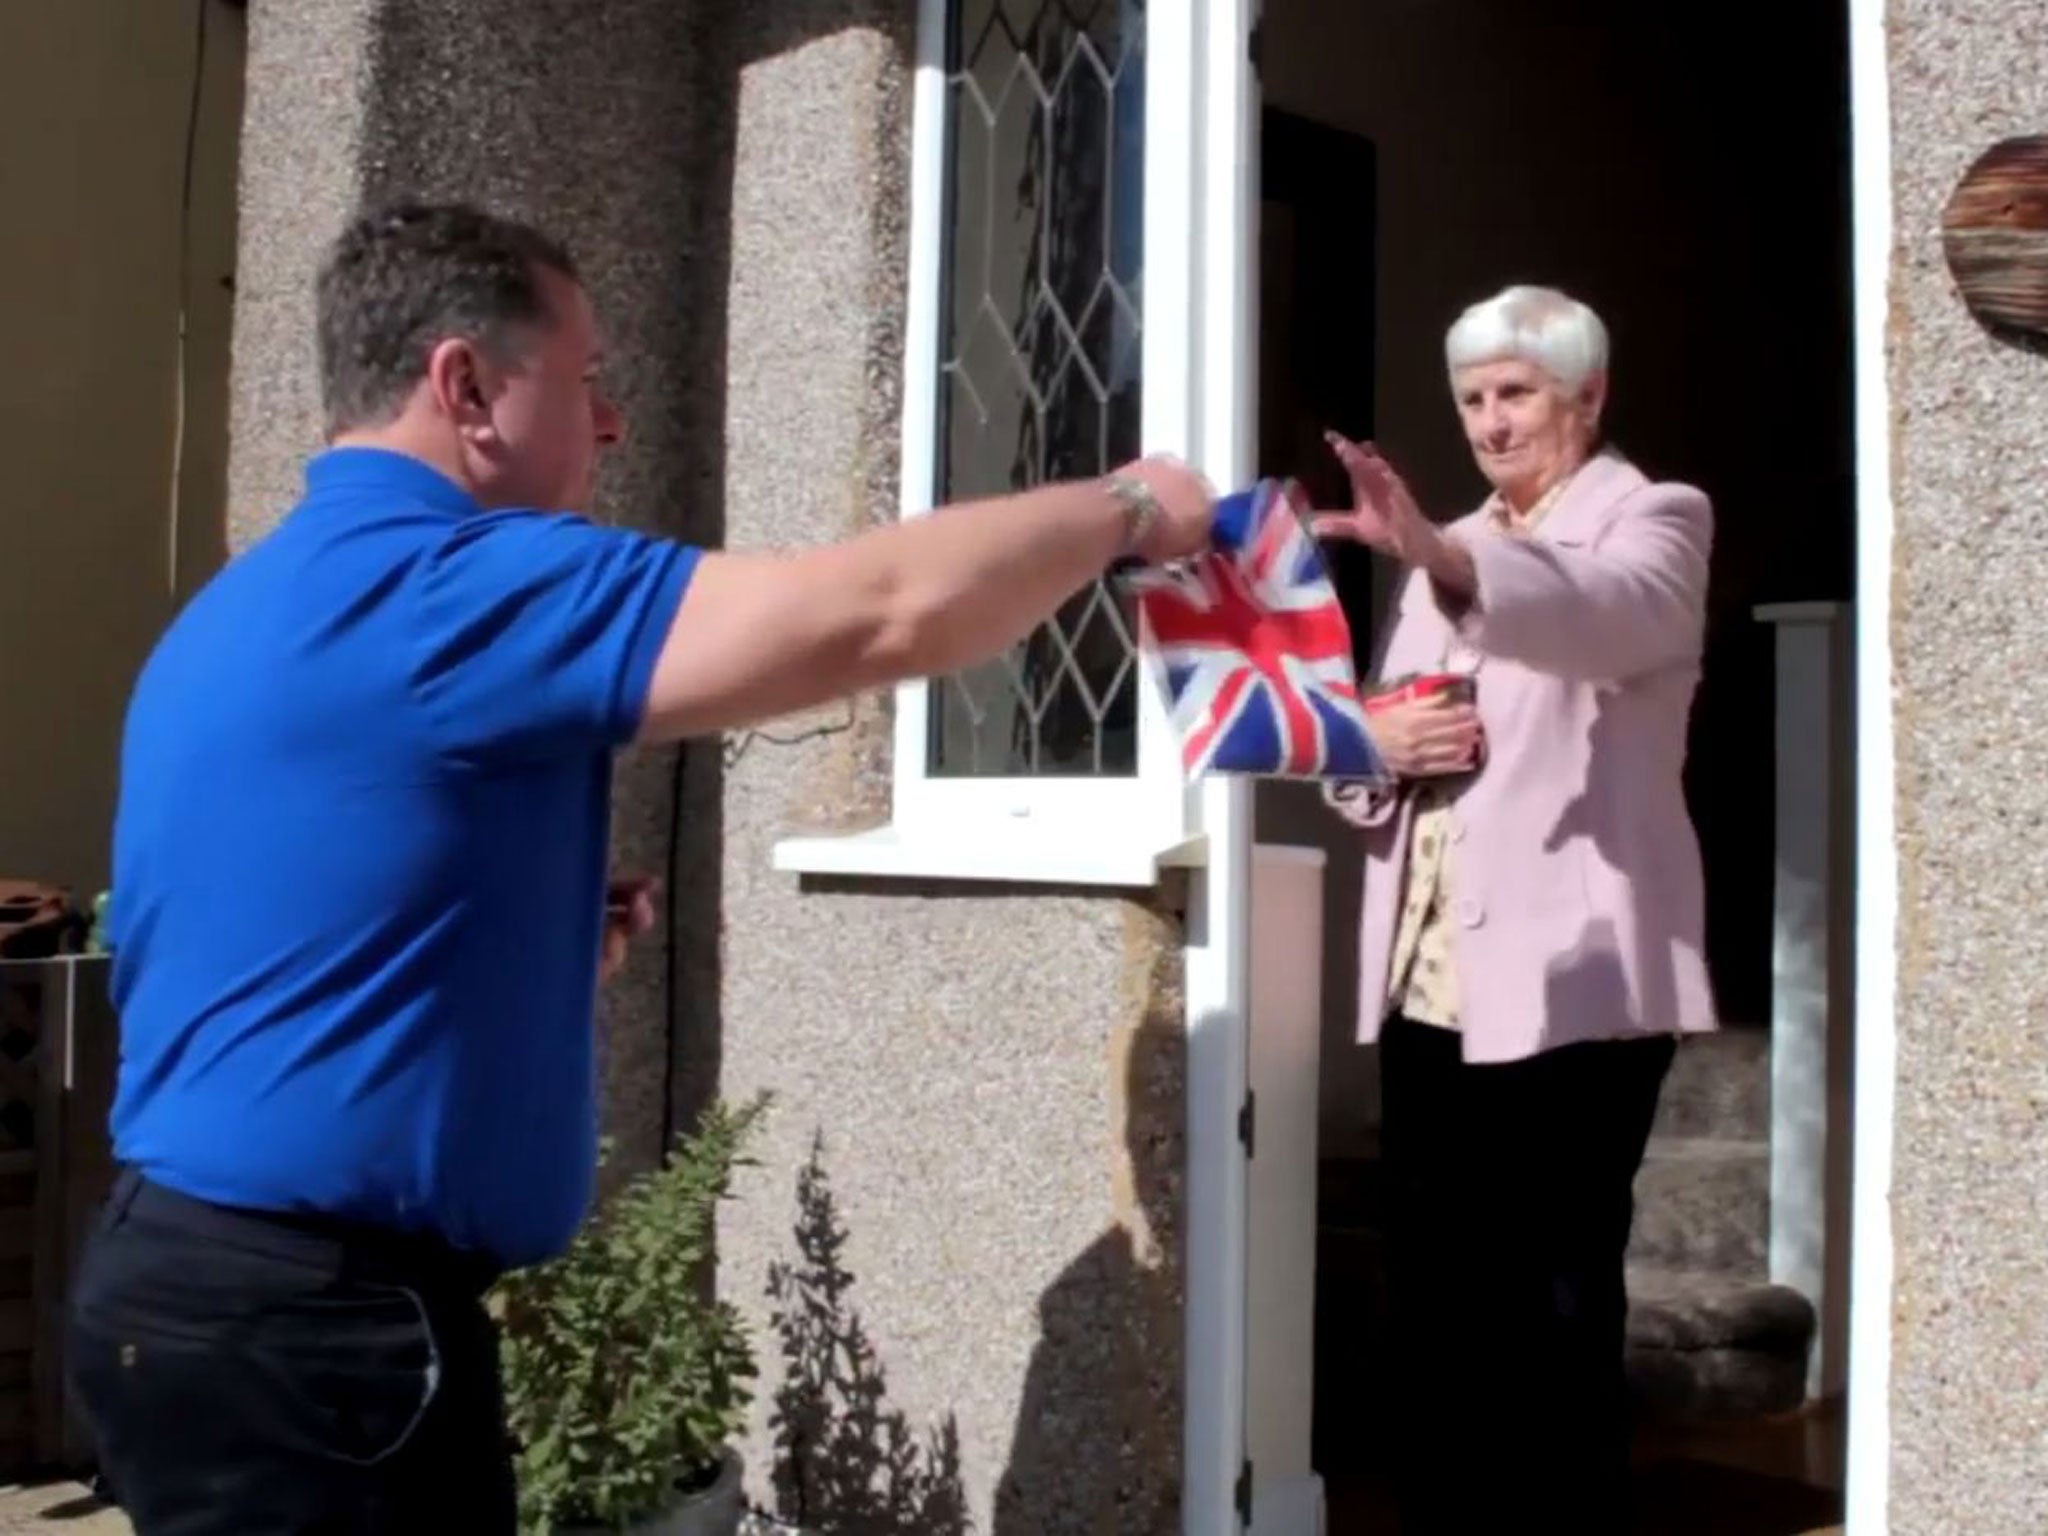 A scene from the BNP’s YouTube video advising activists on food donations